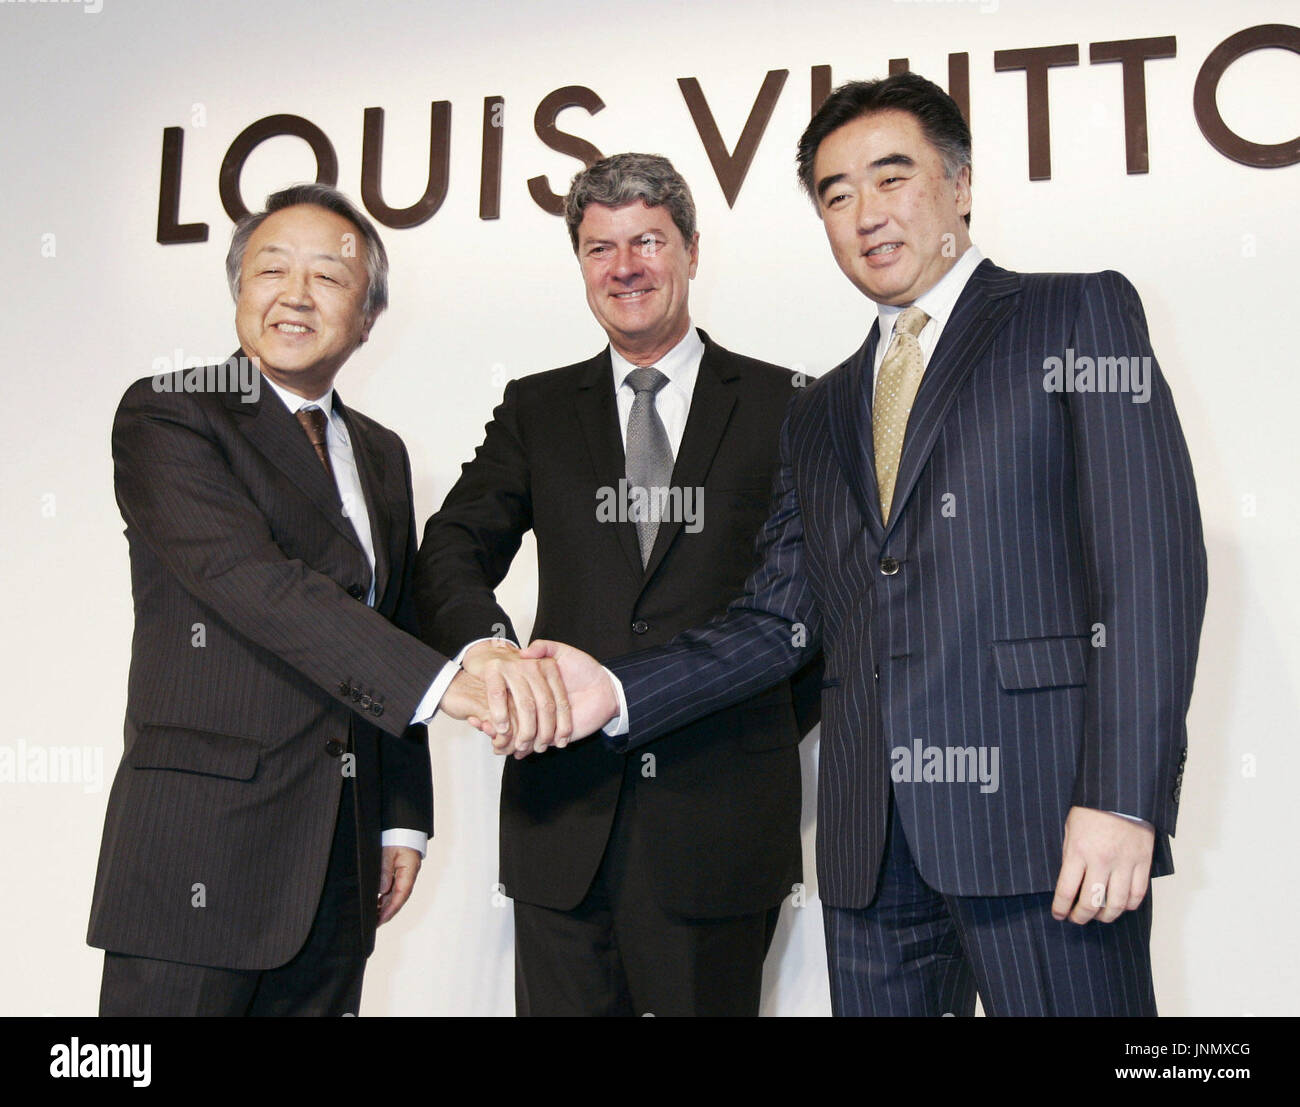 TOKYO, Japan - Yves Carcelle (C), chairman and CEO of Louis